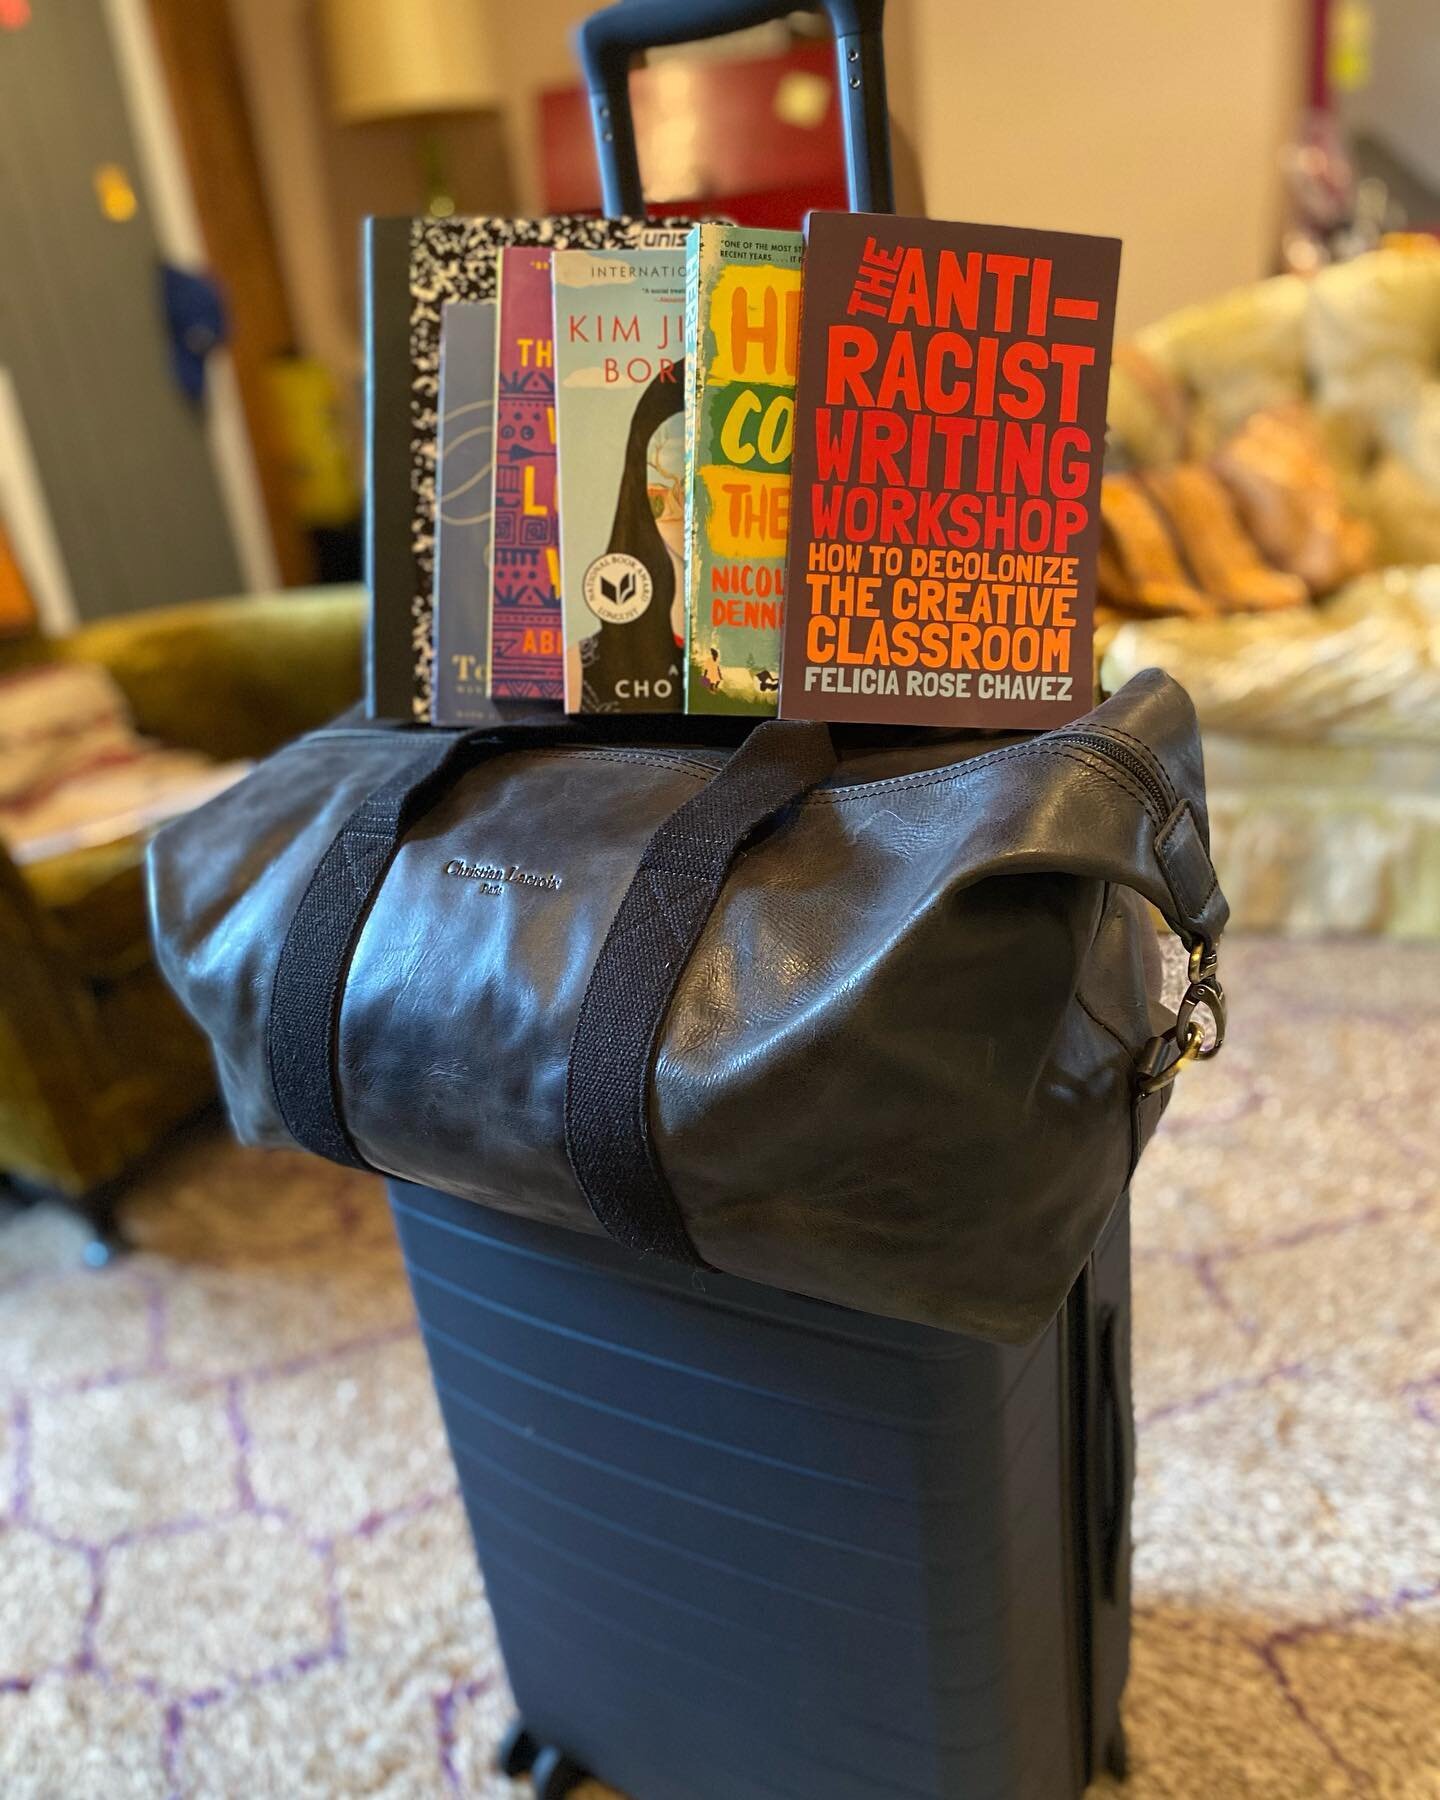 For the first time in 18 months, I recently had the opportunity to travel. 😅 As I packed, I was aware I felt nervous, excited, privileged, conflicted. My @away &ldquo;larger carry on&rdquo; magically expands + before I knew it, I had 5 books + sever